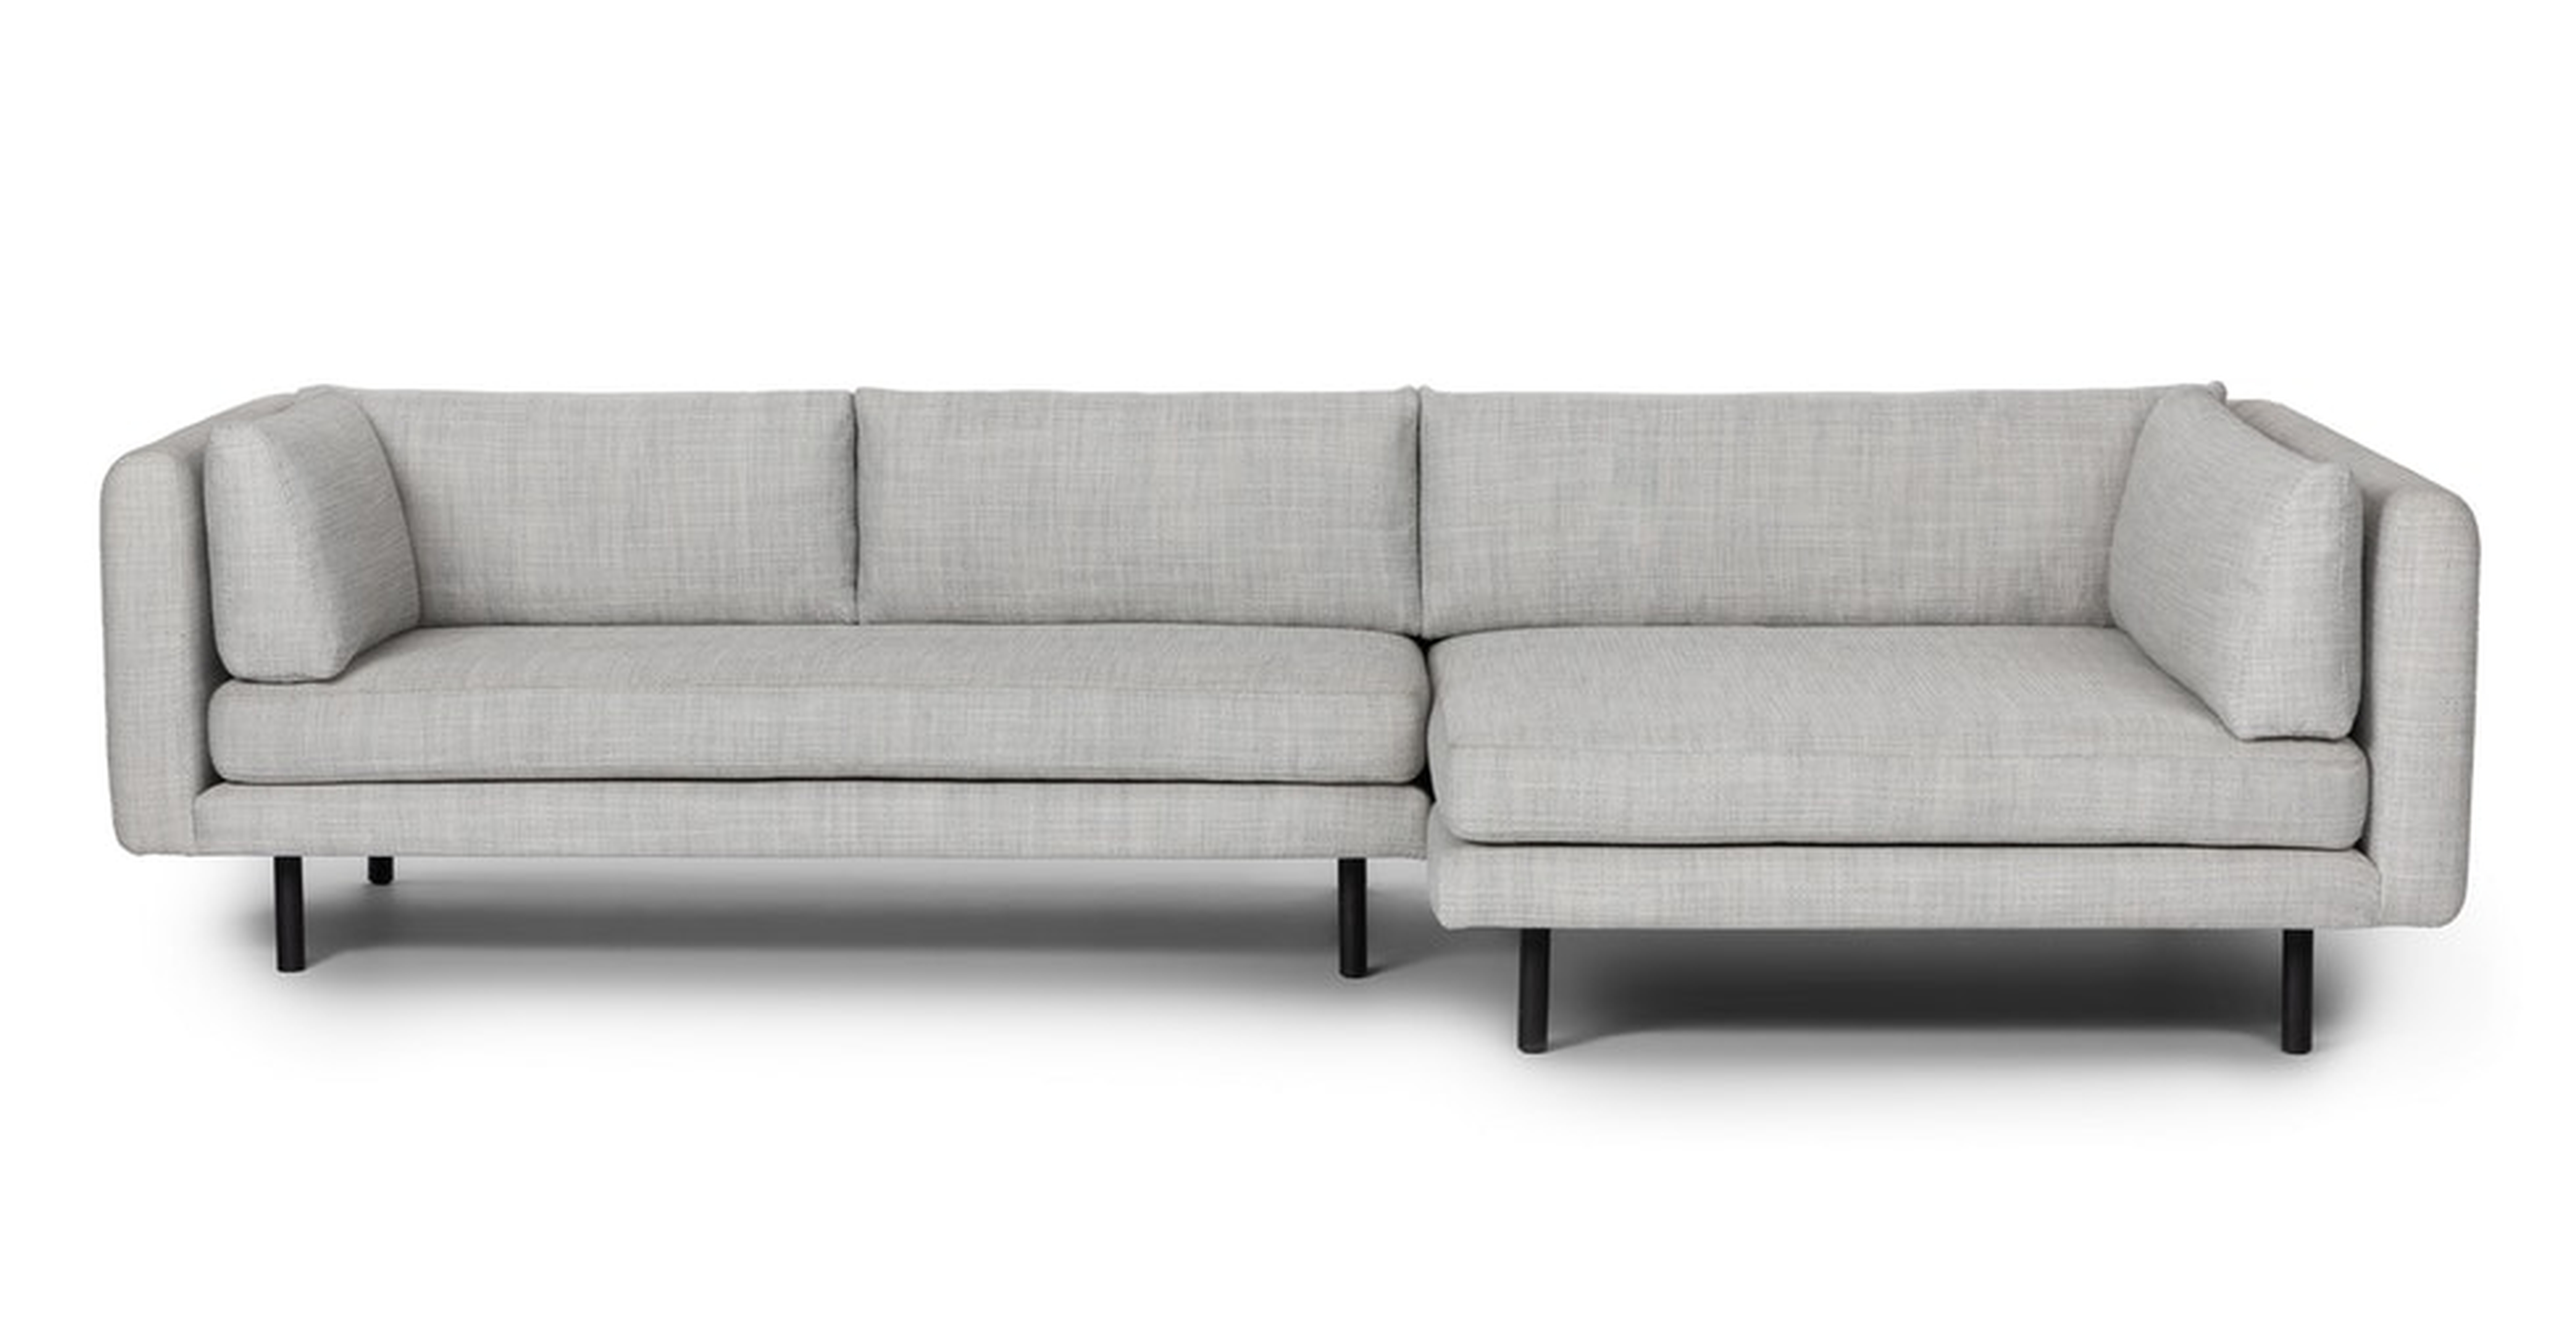 Lappi Right Sectional Sofa, Serene Gray - Article